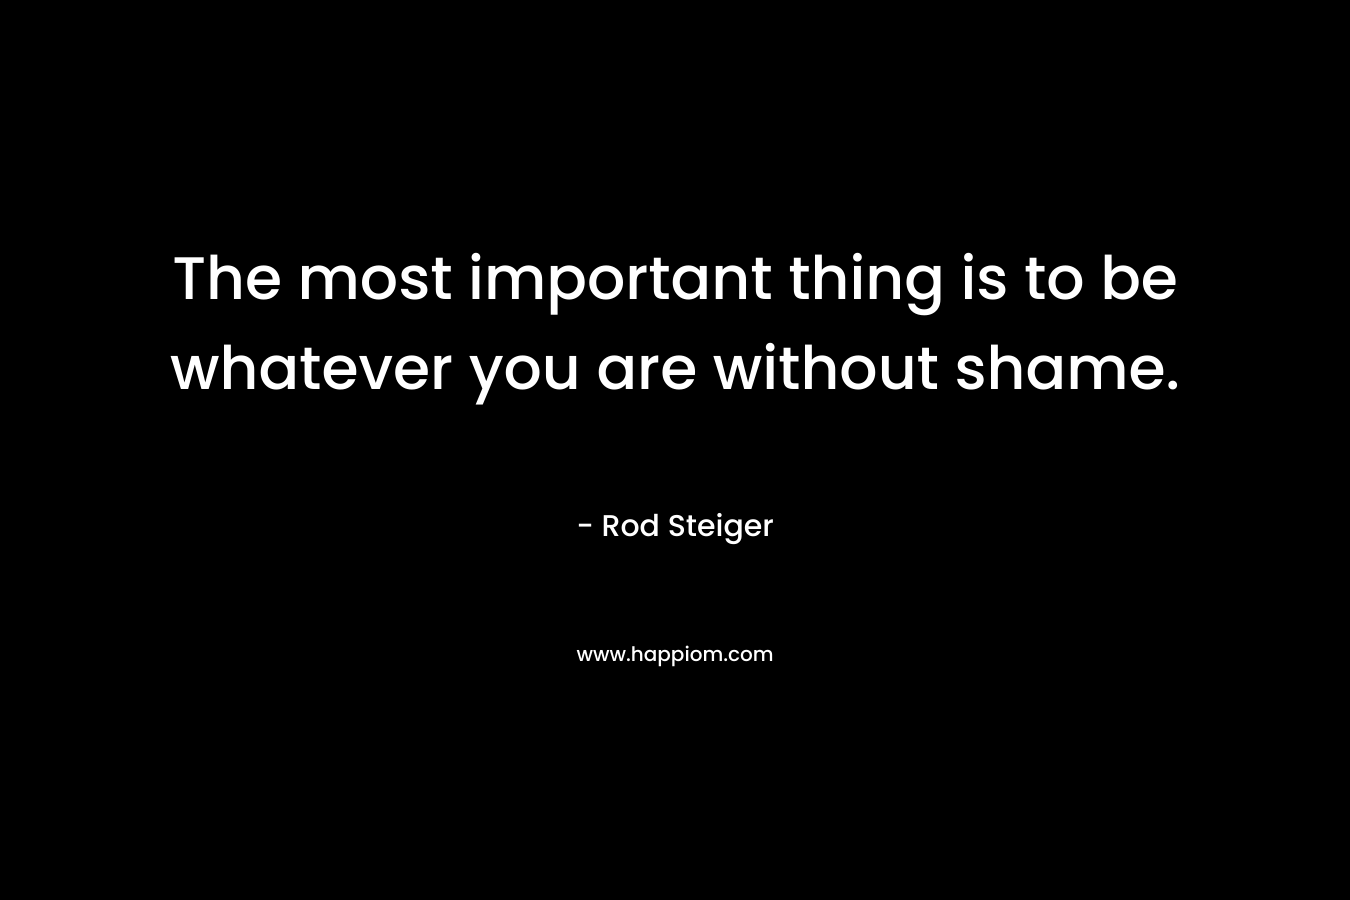 The most important thing is to be whatever you are without shame.